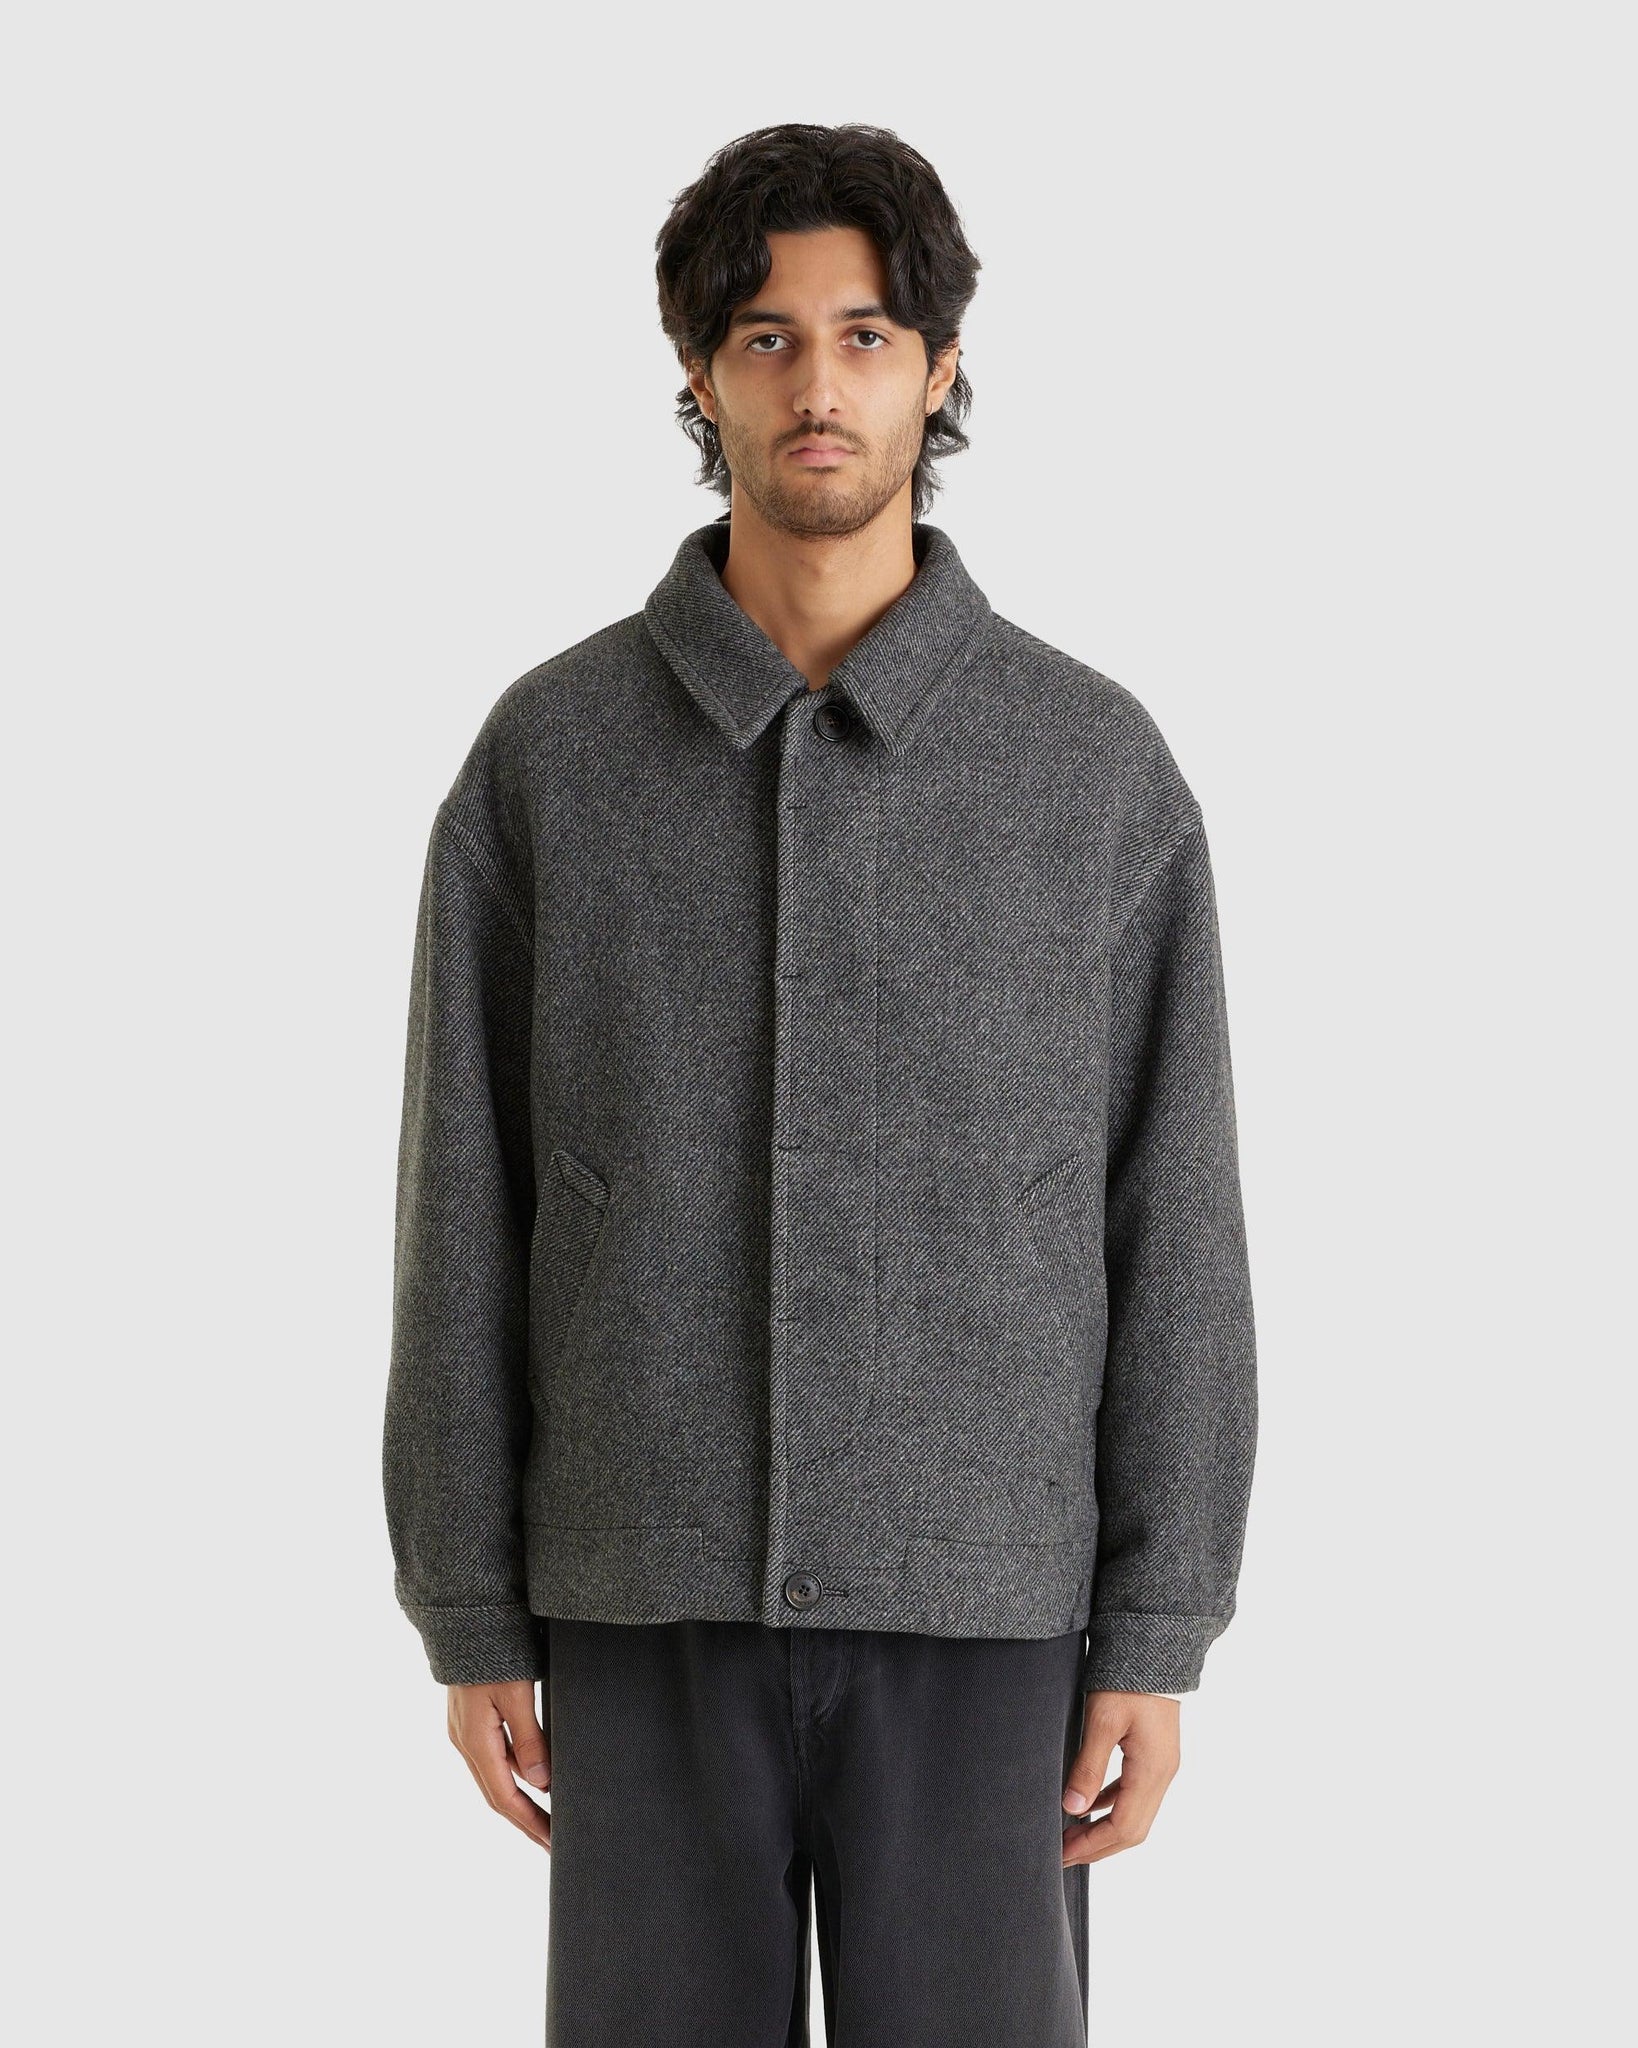 Simon Coat Jacket - {{ collection.title }} - Chinatown Country Club 